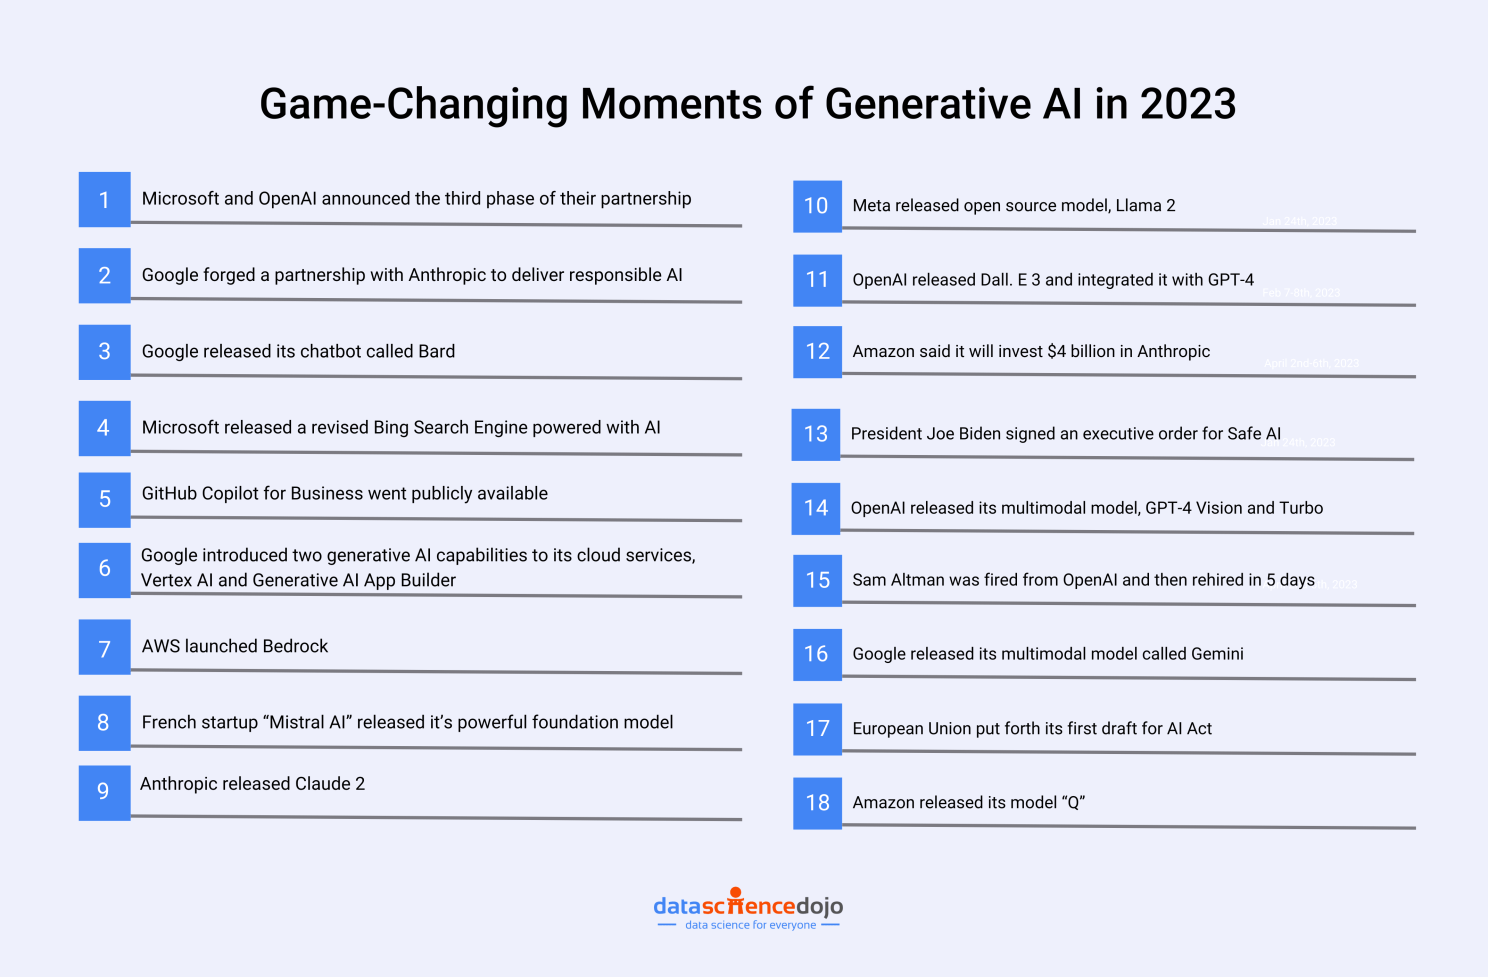 Game changing moments of Generative AI in 2023